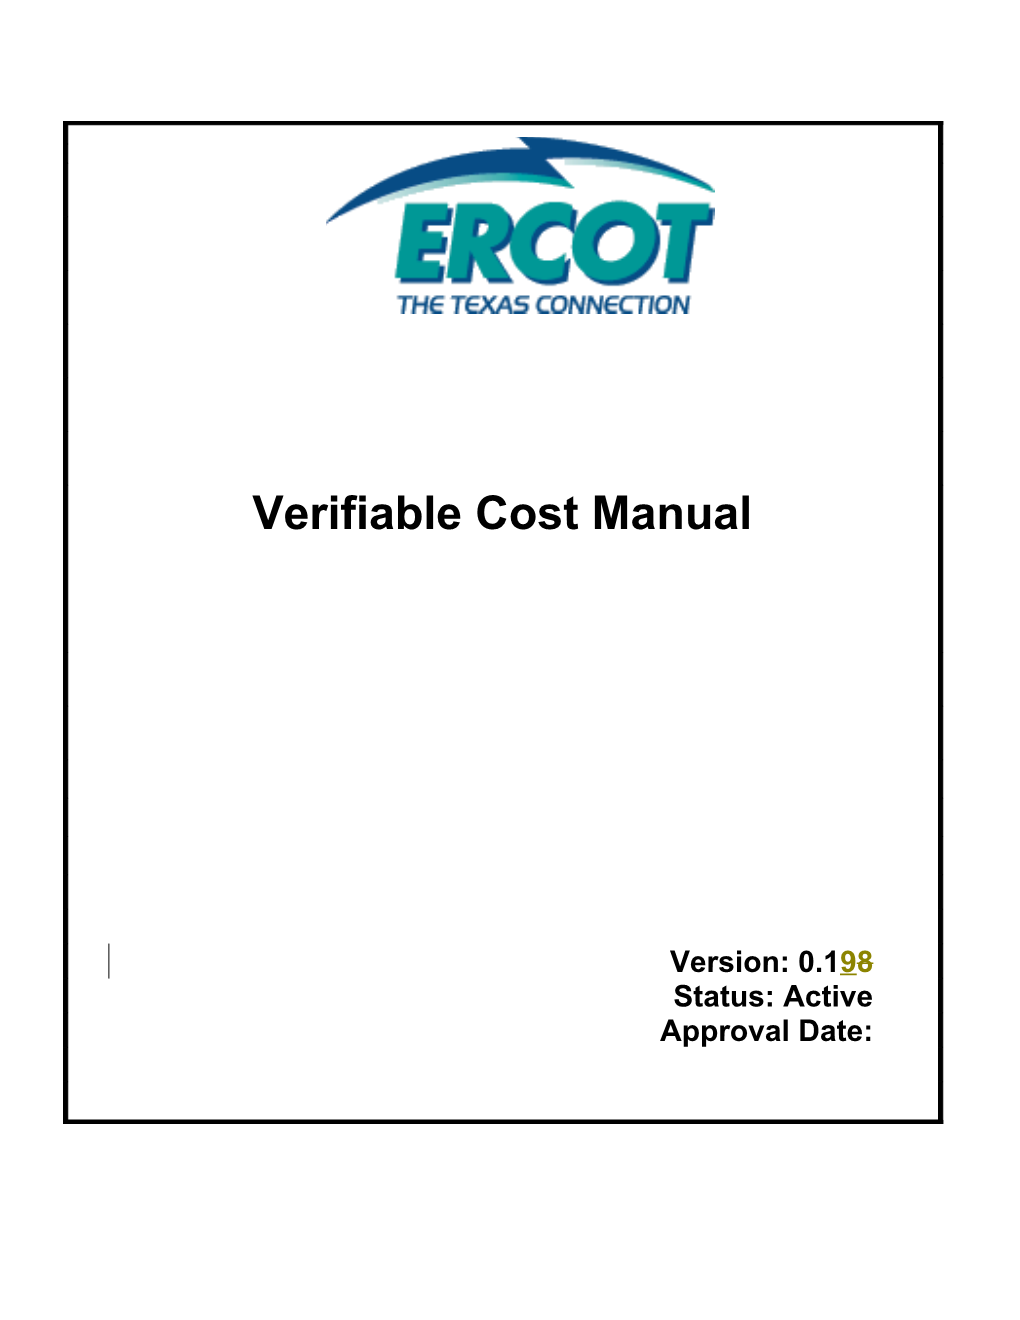 ERCOT's Verifiable Cost Manual s2